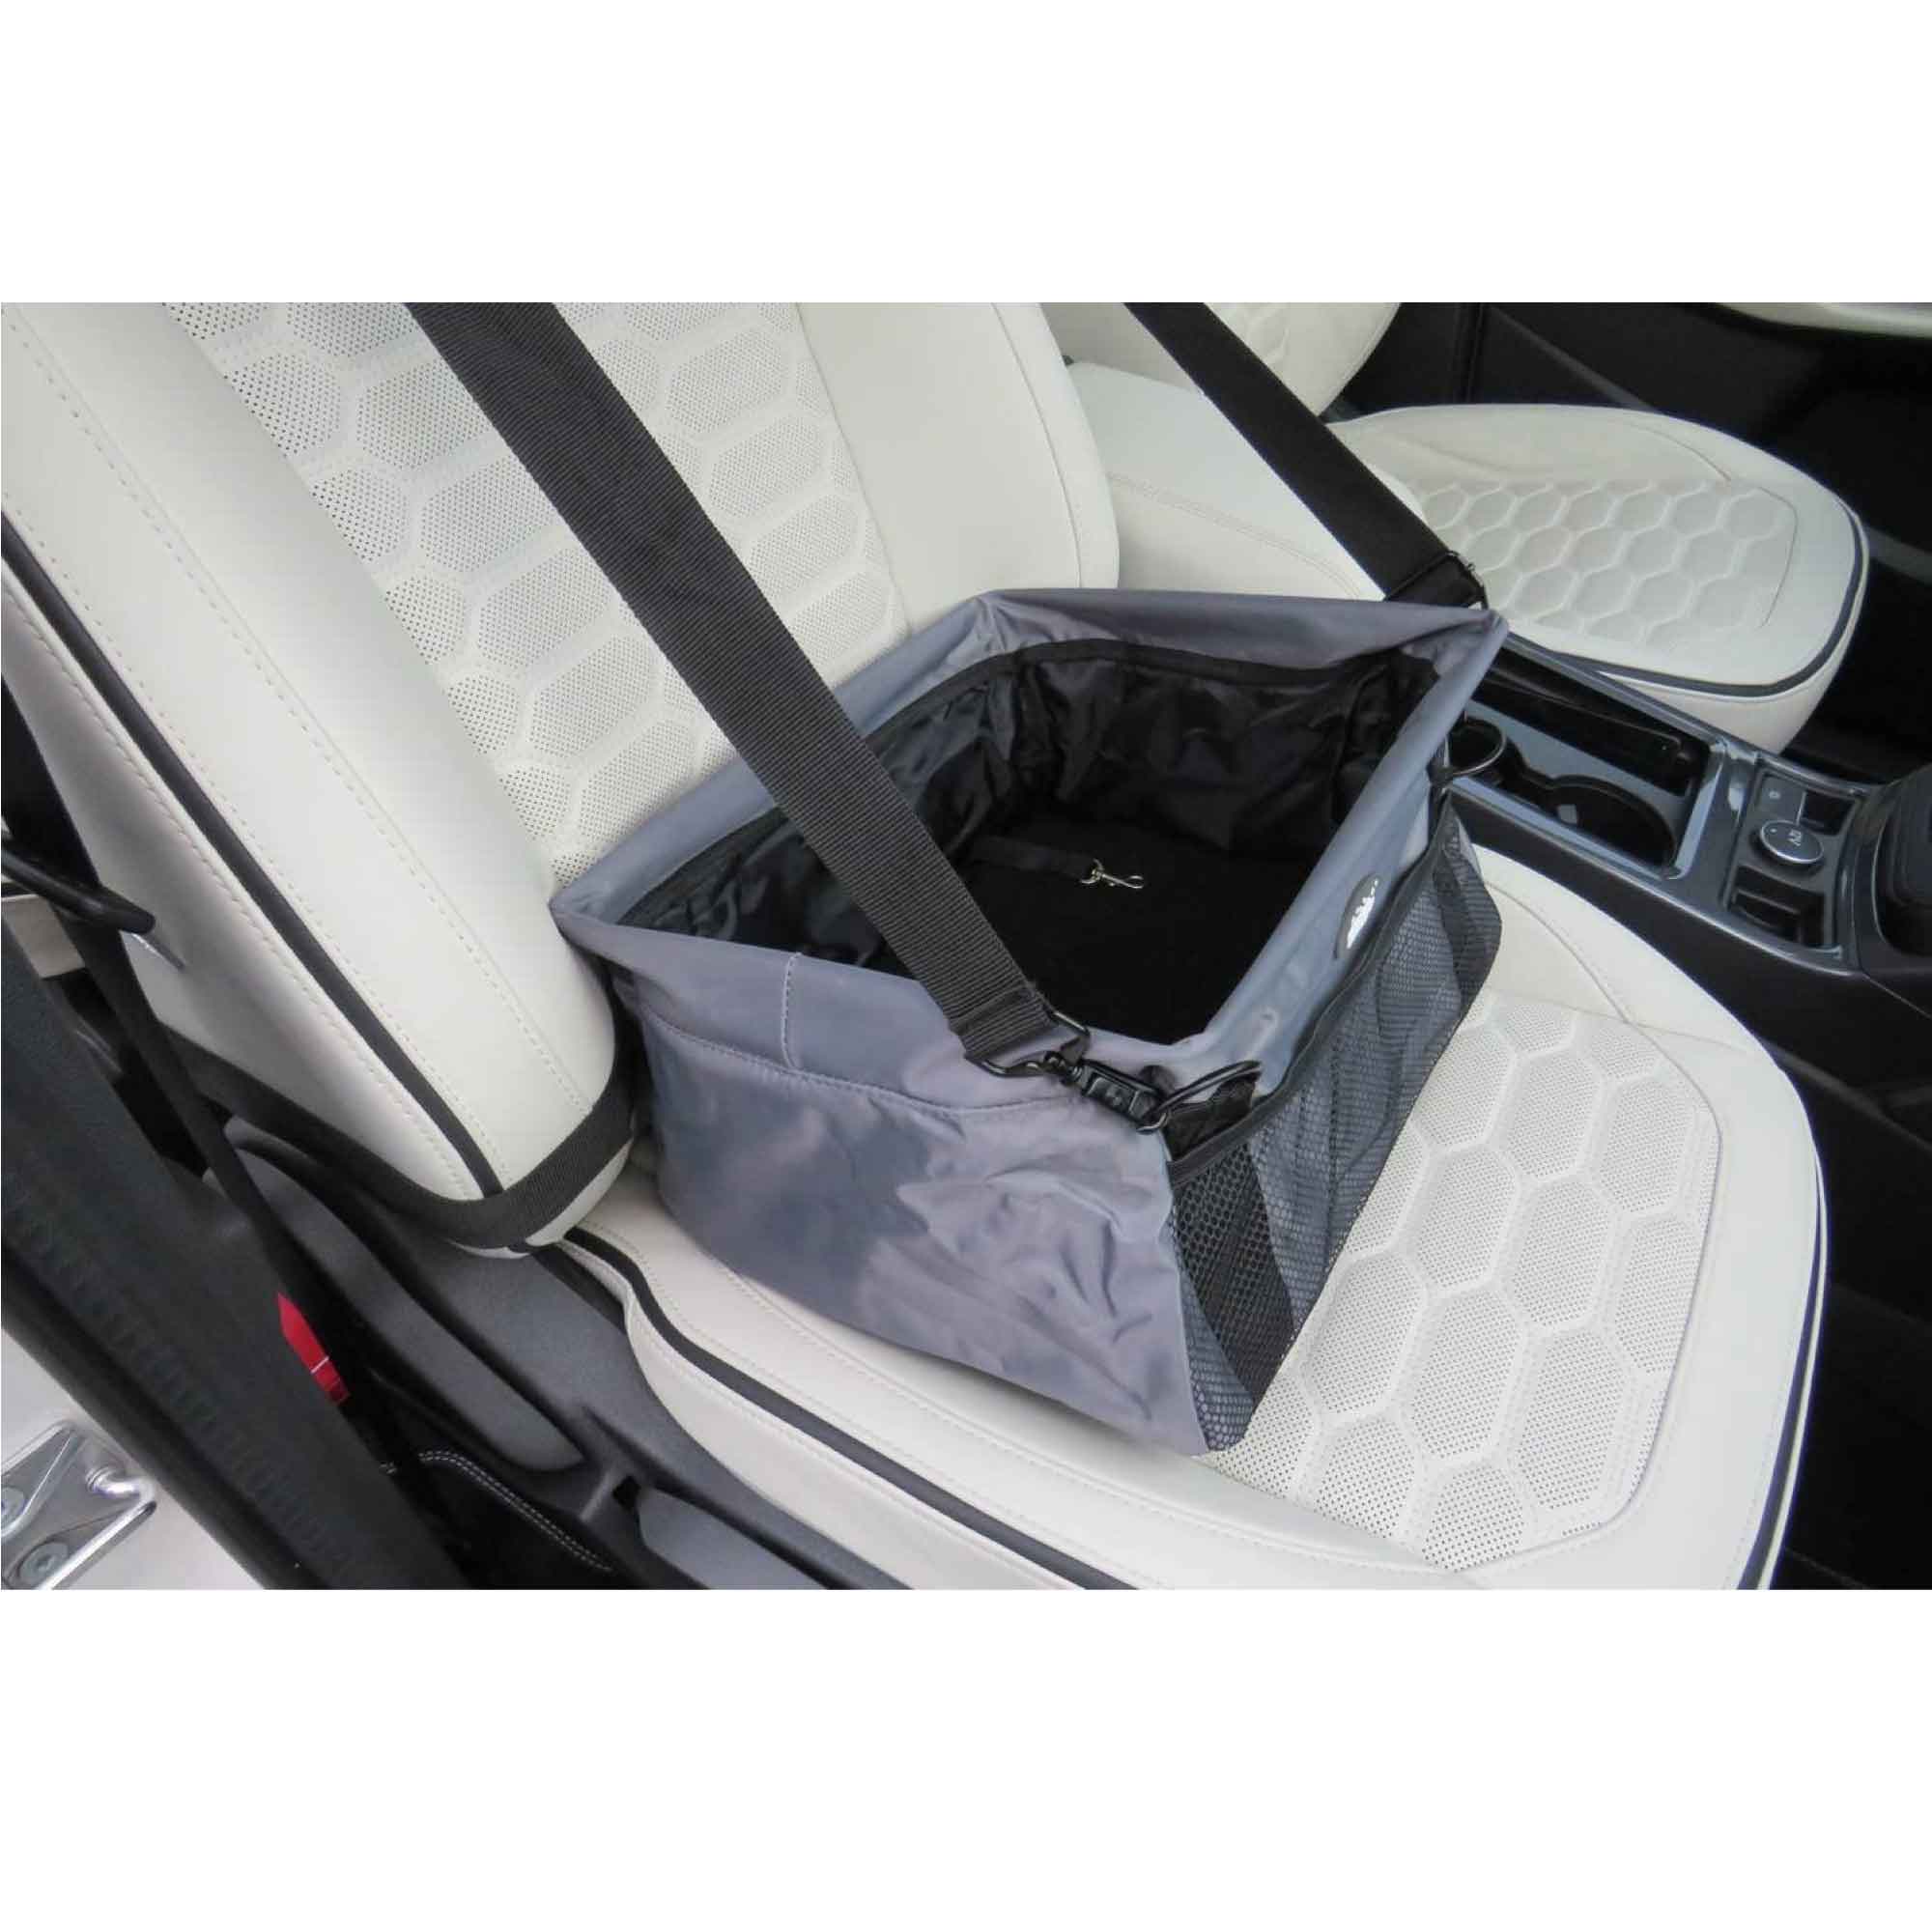 Collapsible Pet Car Booster Seat - Travel Carrier for Dogs, Cats, Puppies